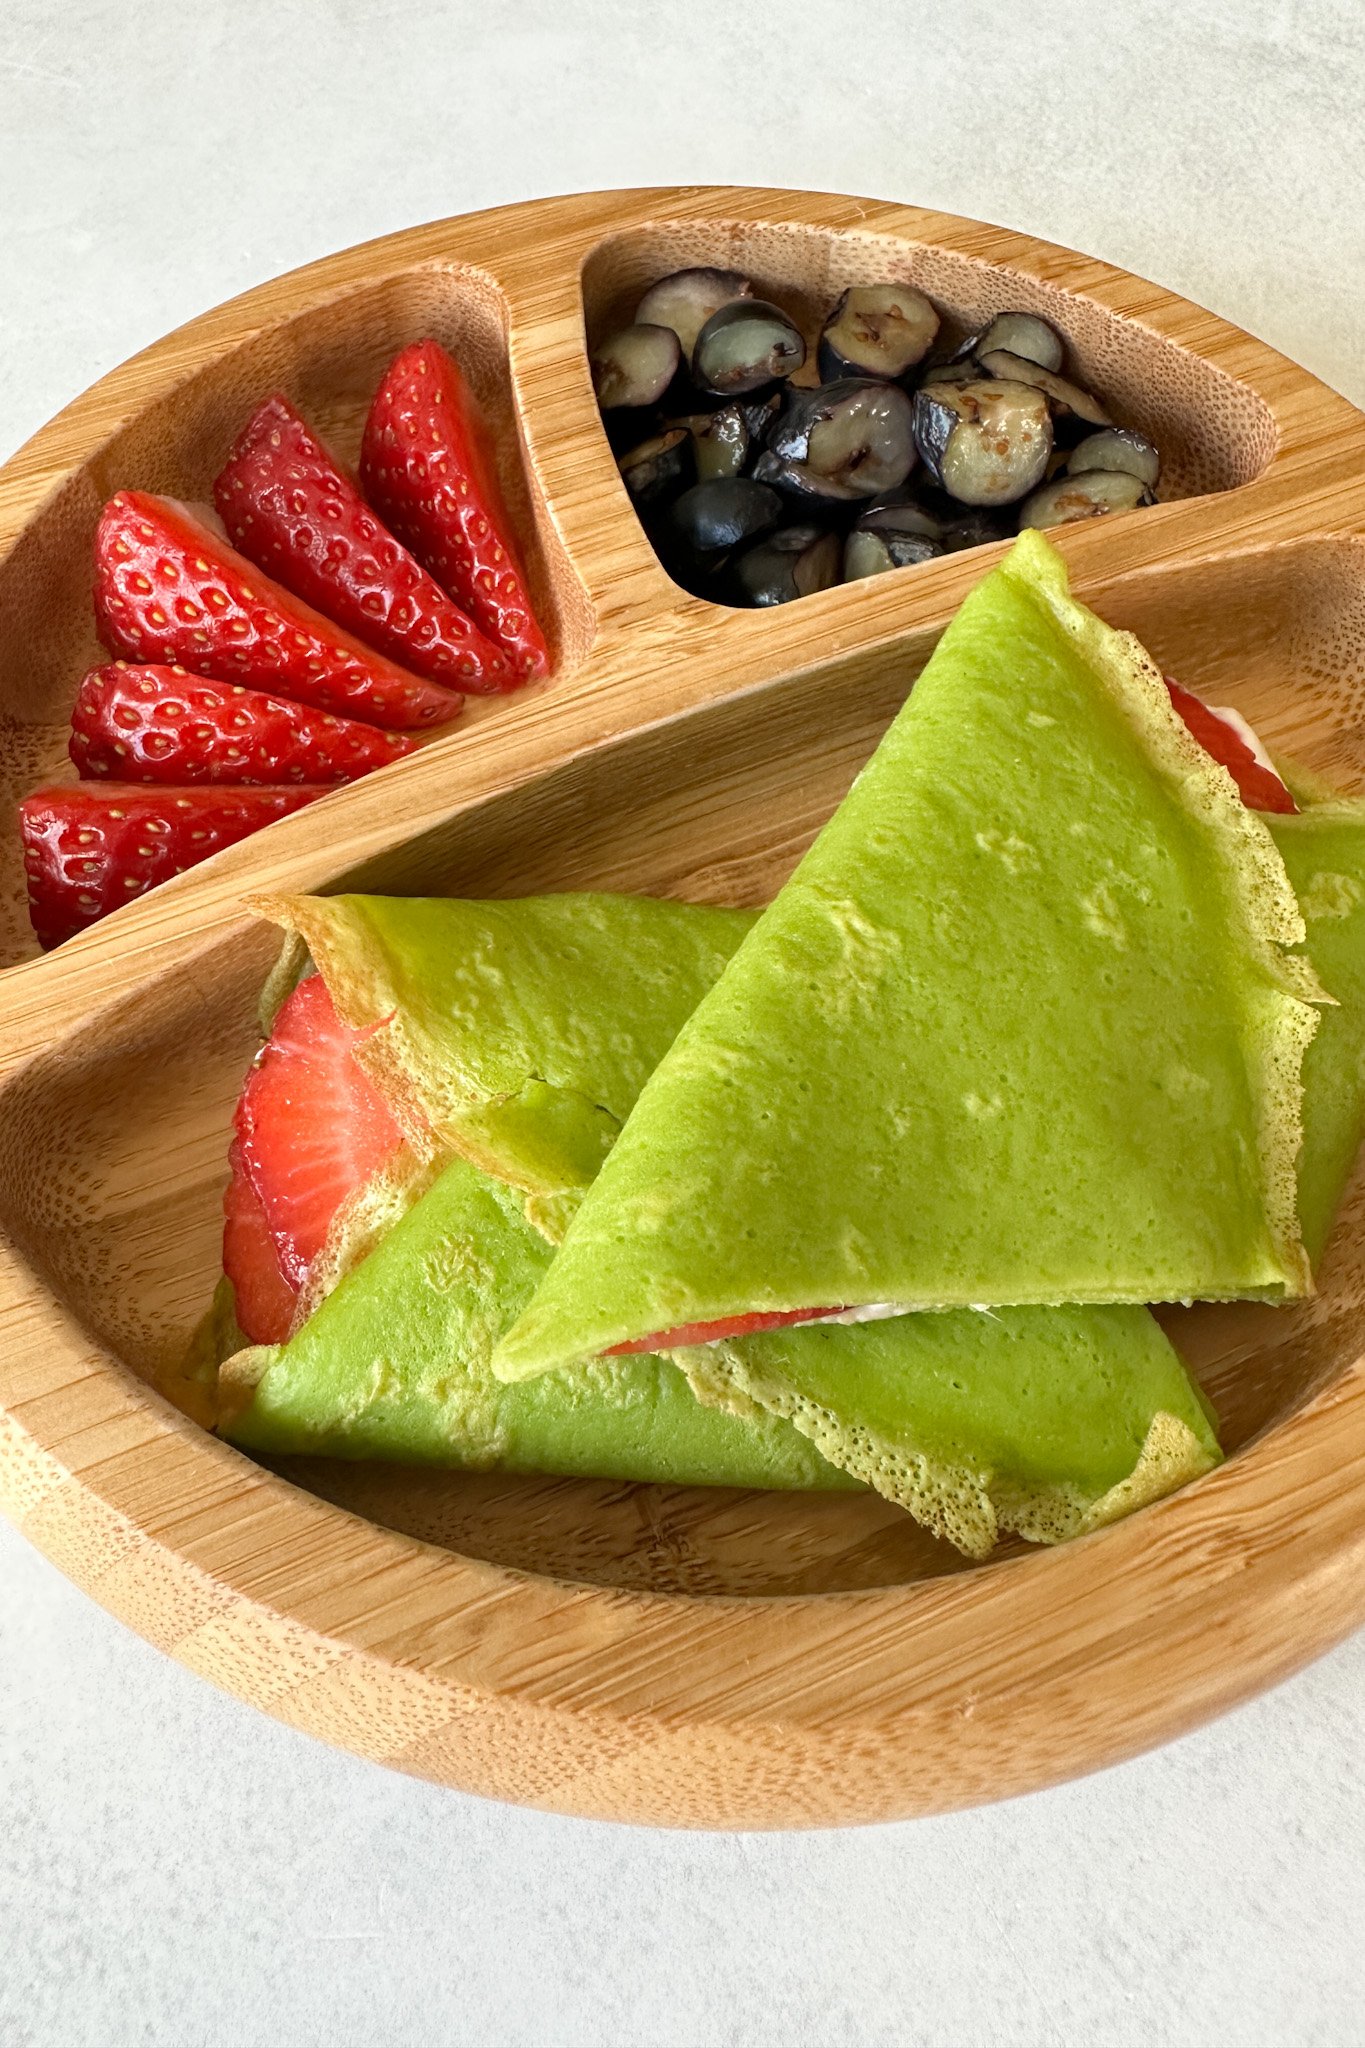 Spinach crepes filled with yogurt and strawberries.